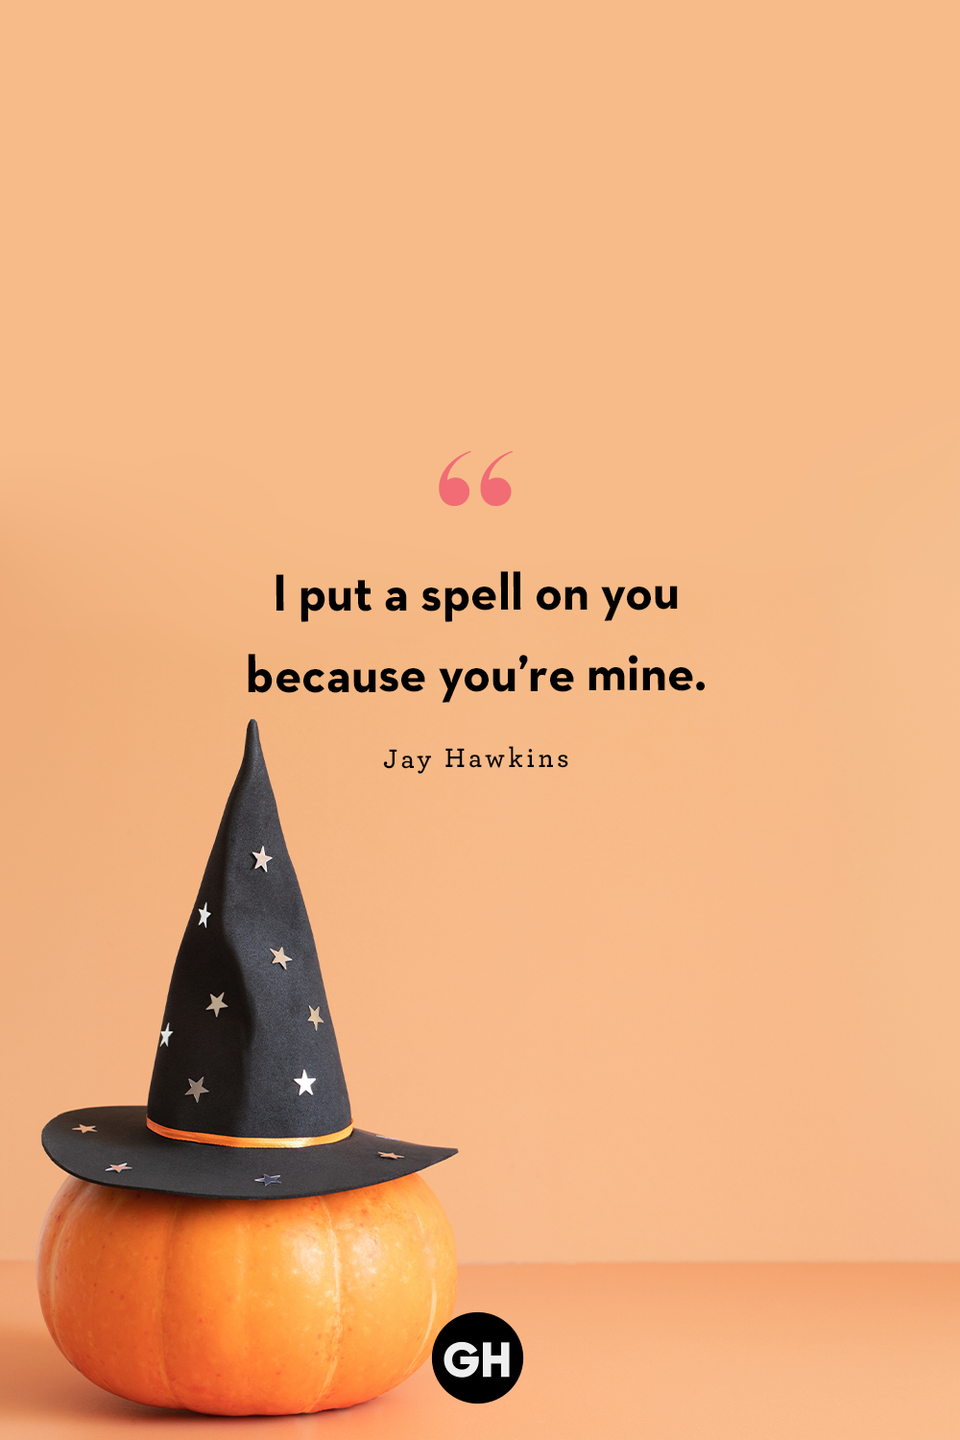 <p>“I put a spell on you because you’re mine."</p>